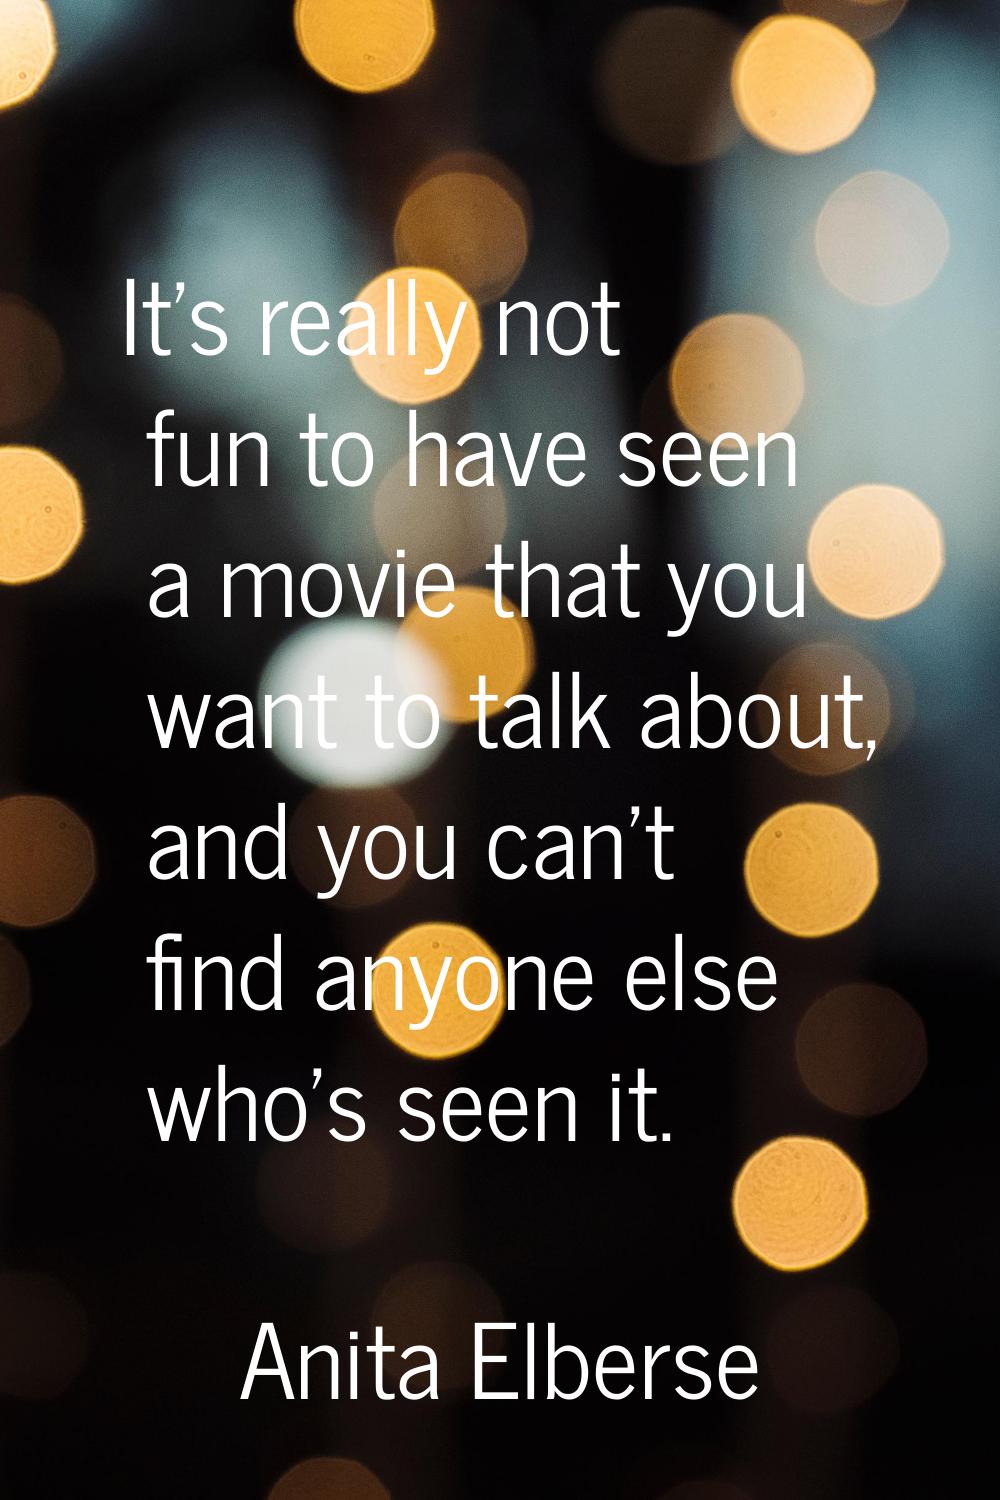 It's really not fun to have seen a movie that you want to talk about, and you can't find anyone els